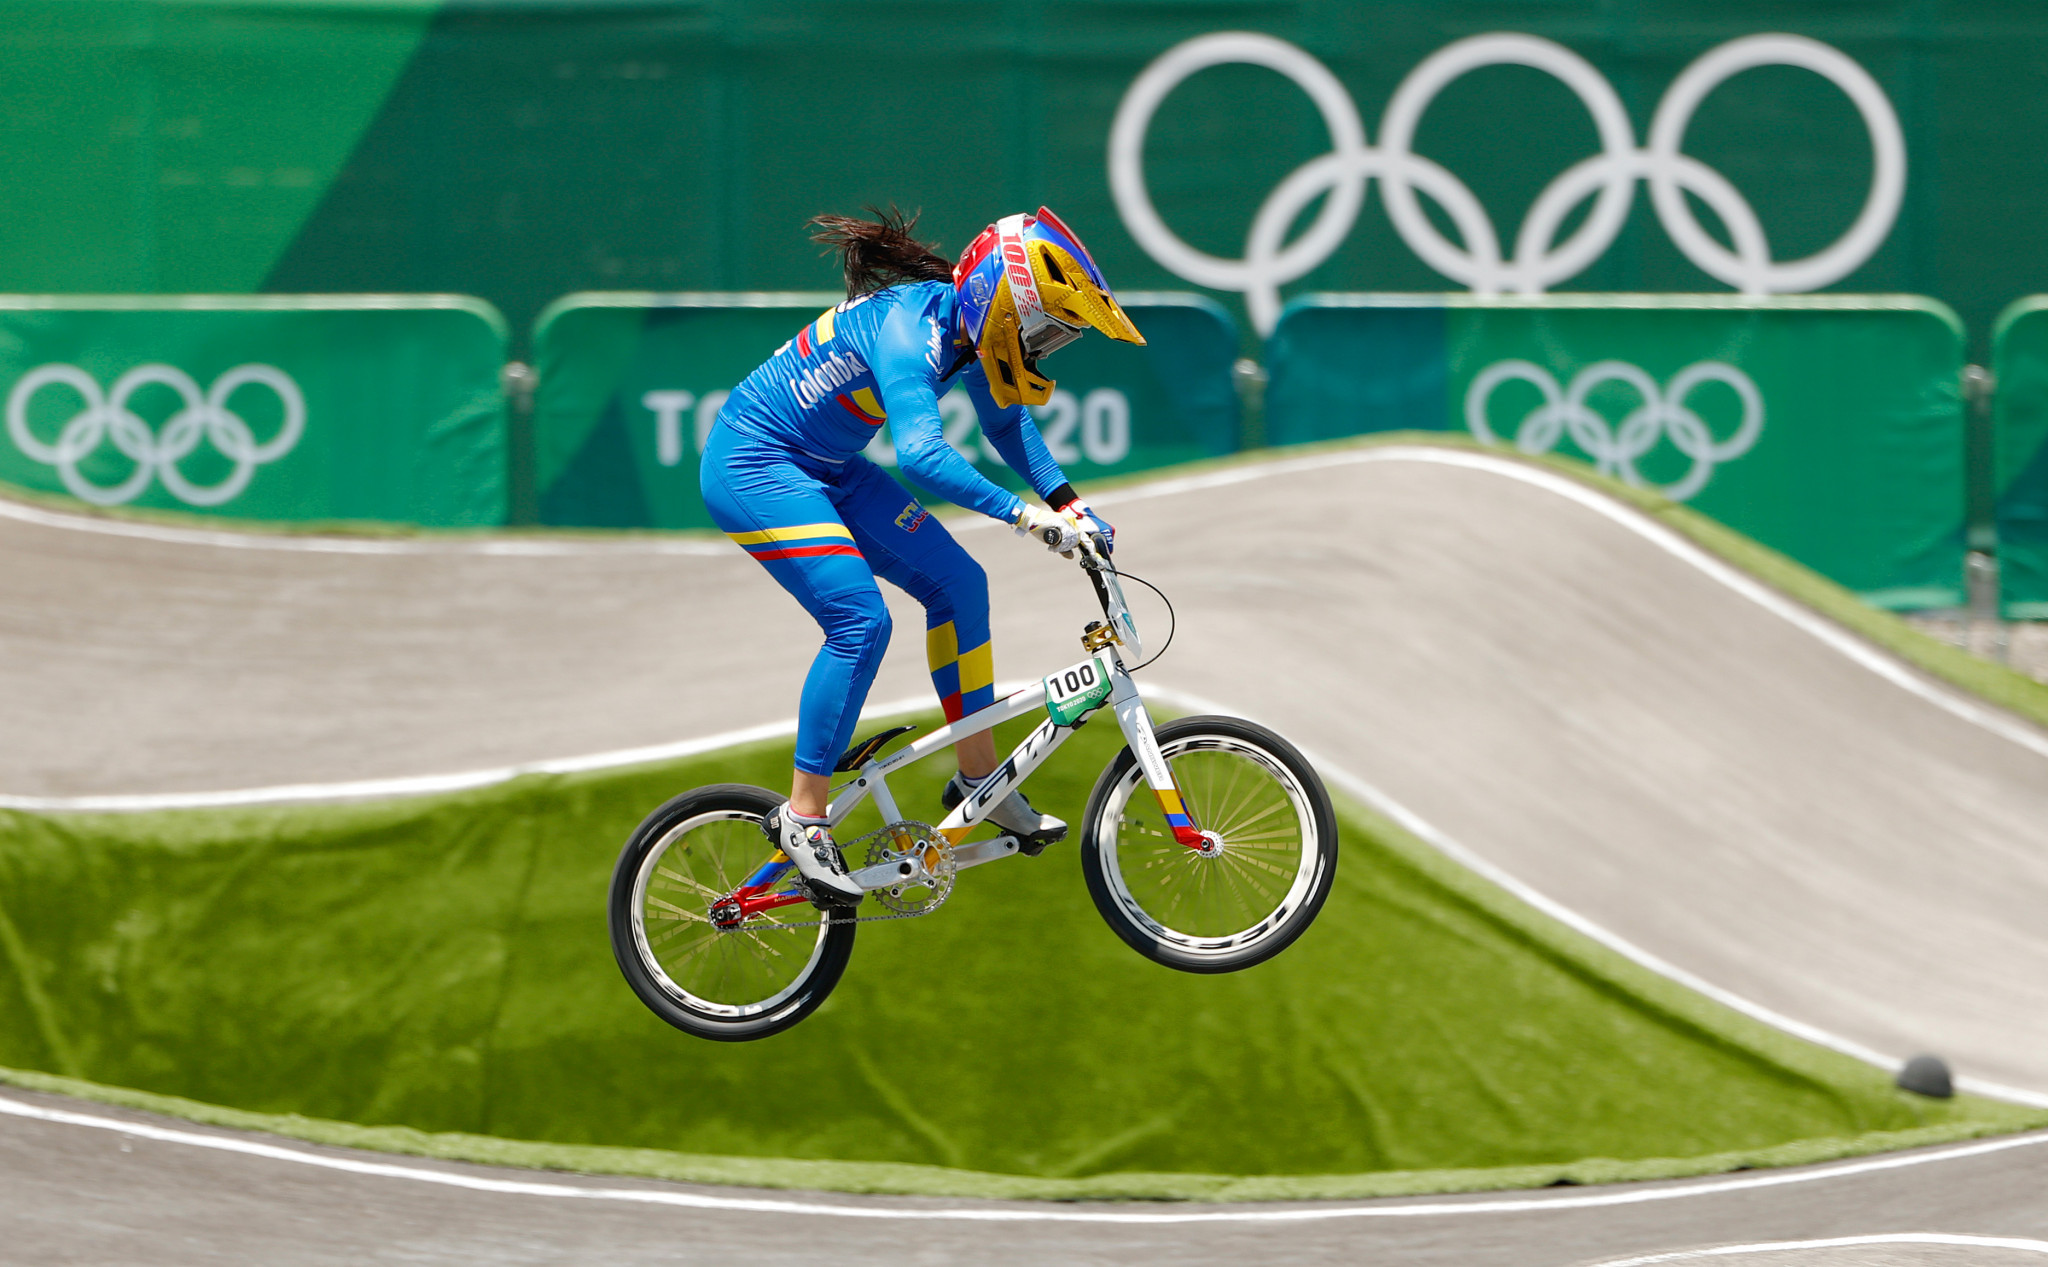 Colombia won two BMX racing medals at Tokyo 2020 ©Getty Images